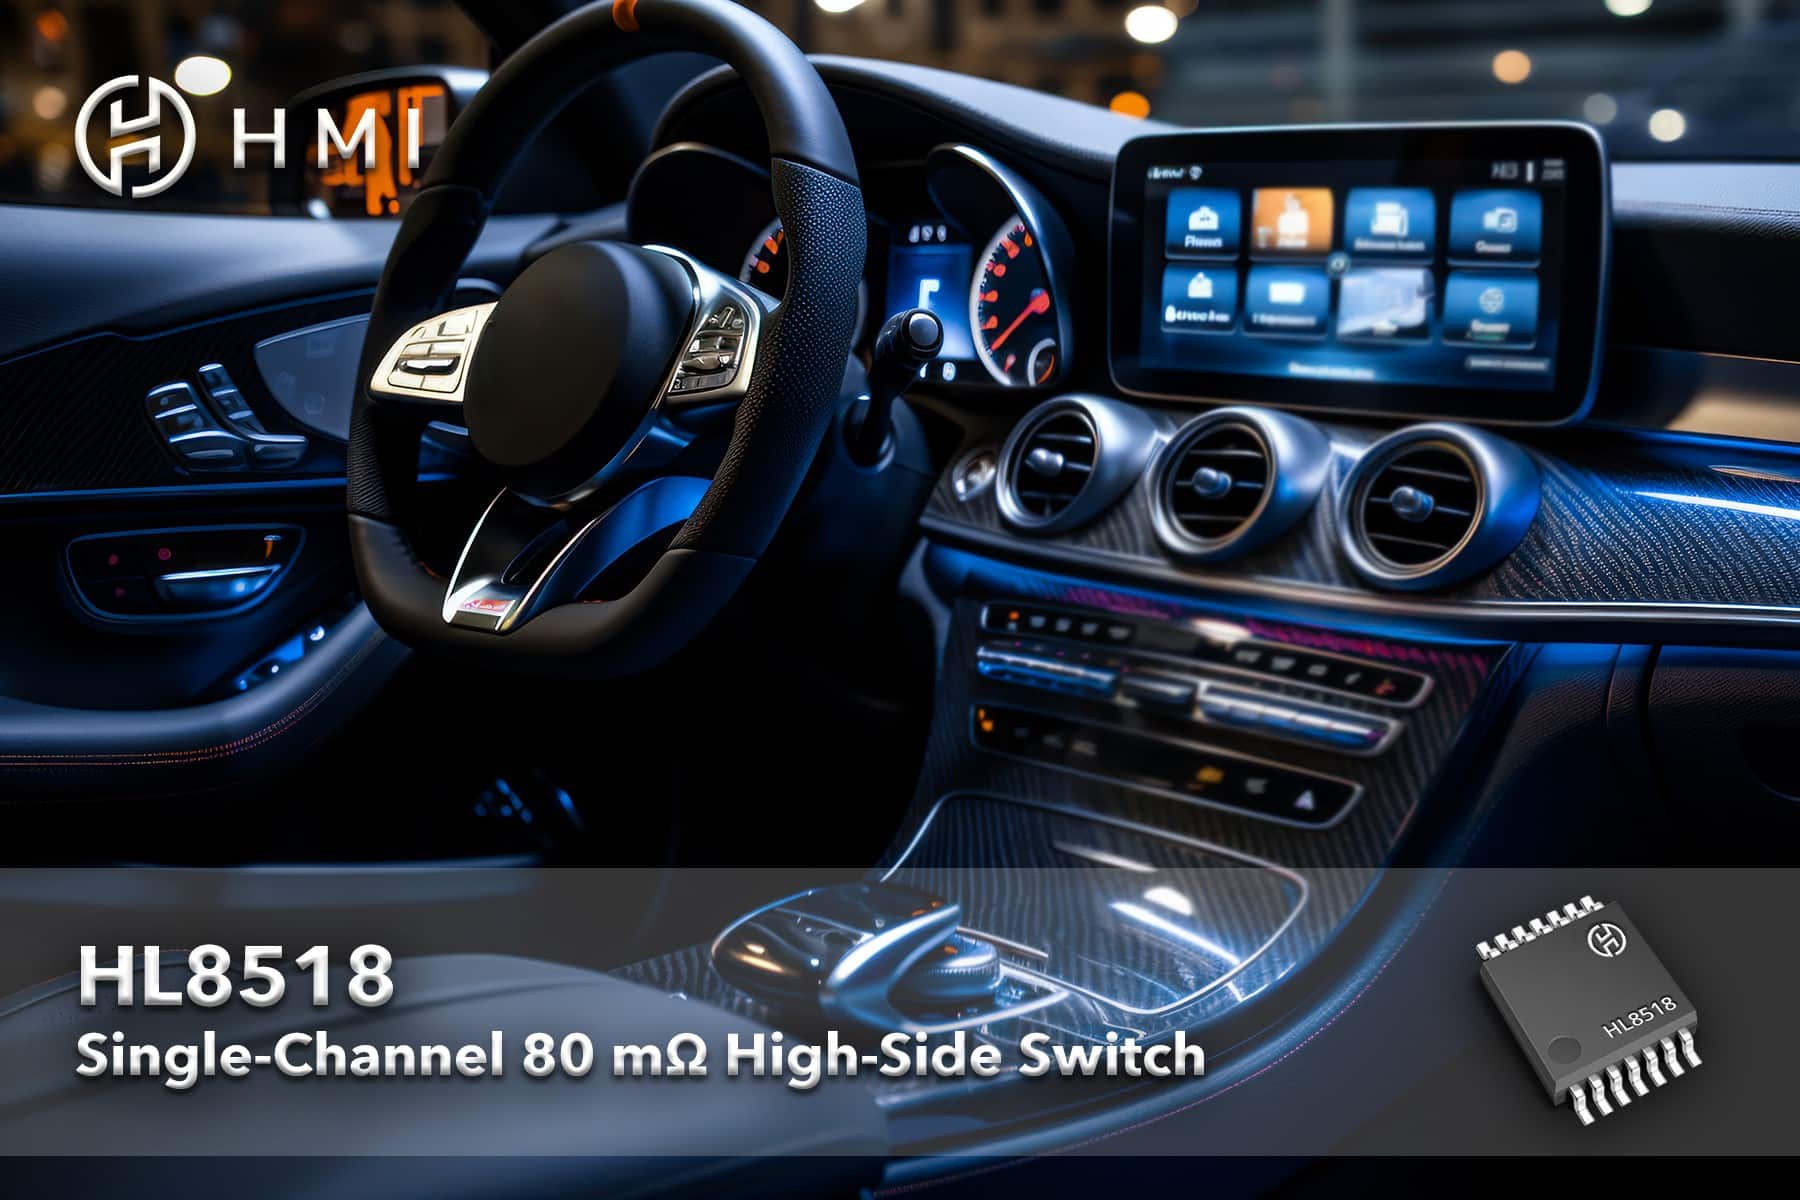 High-Side Switch For Automotive Power Management